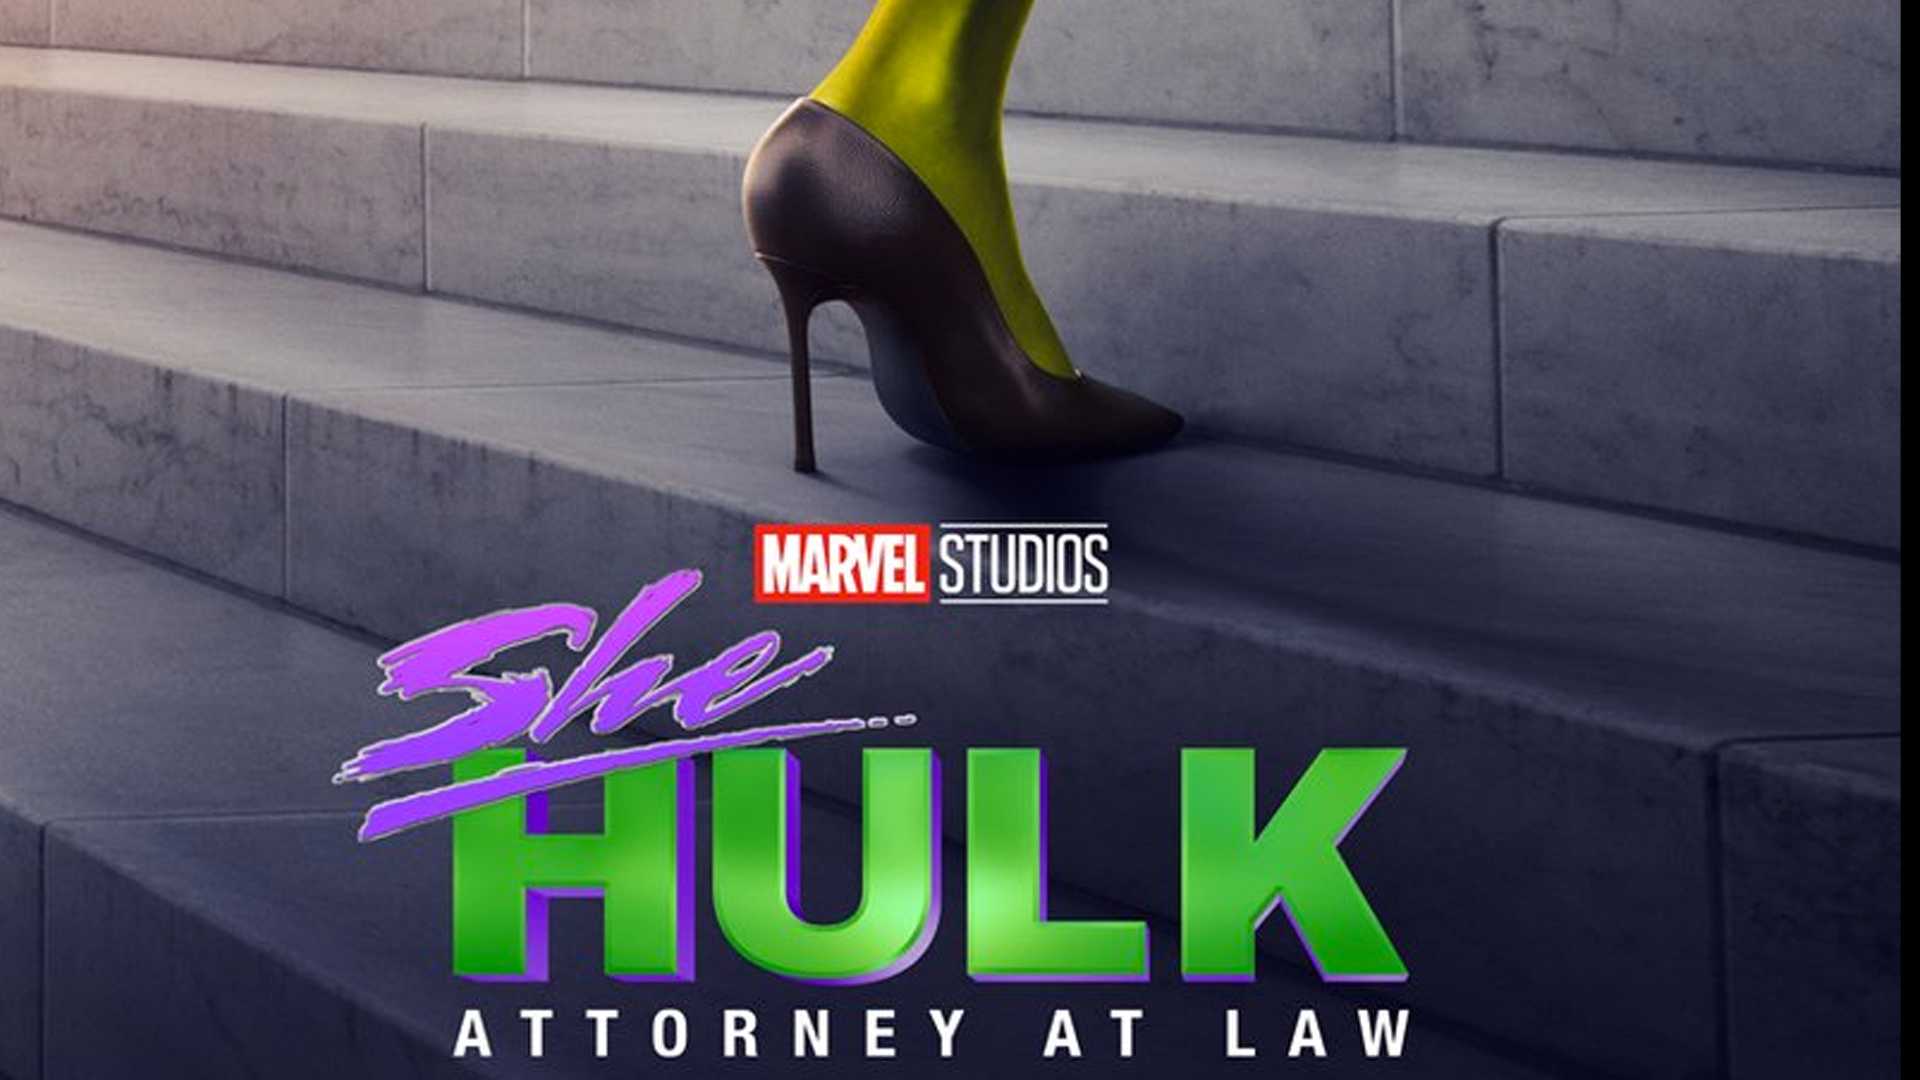 She-Hulk: Attorney at Law new promo still and art gives us our best look at the hero in full costume